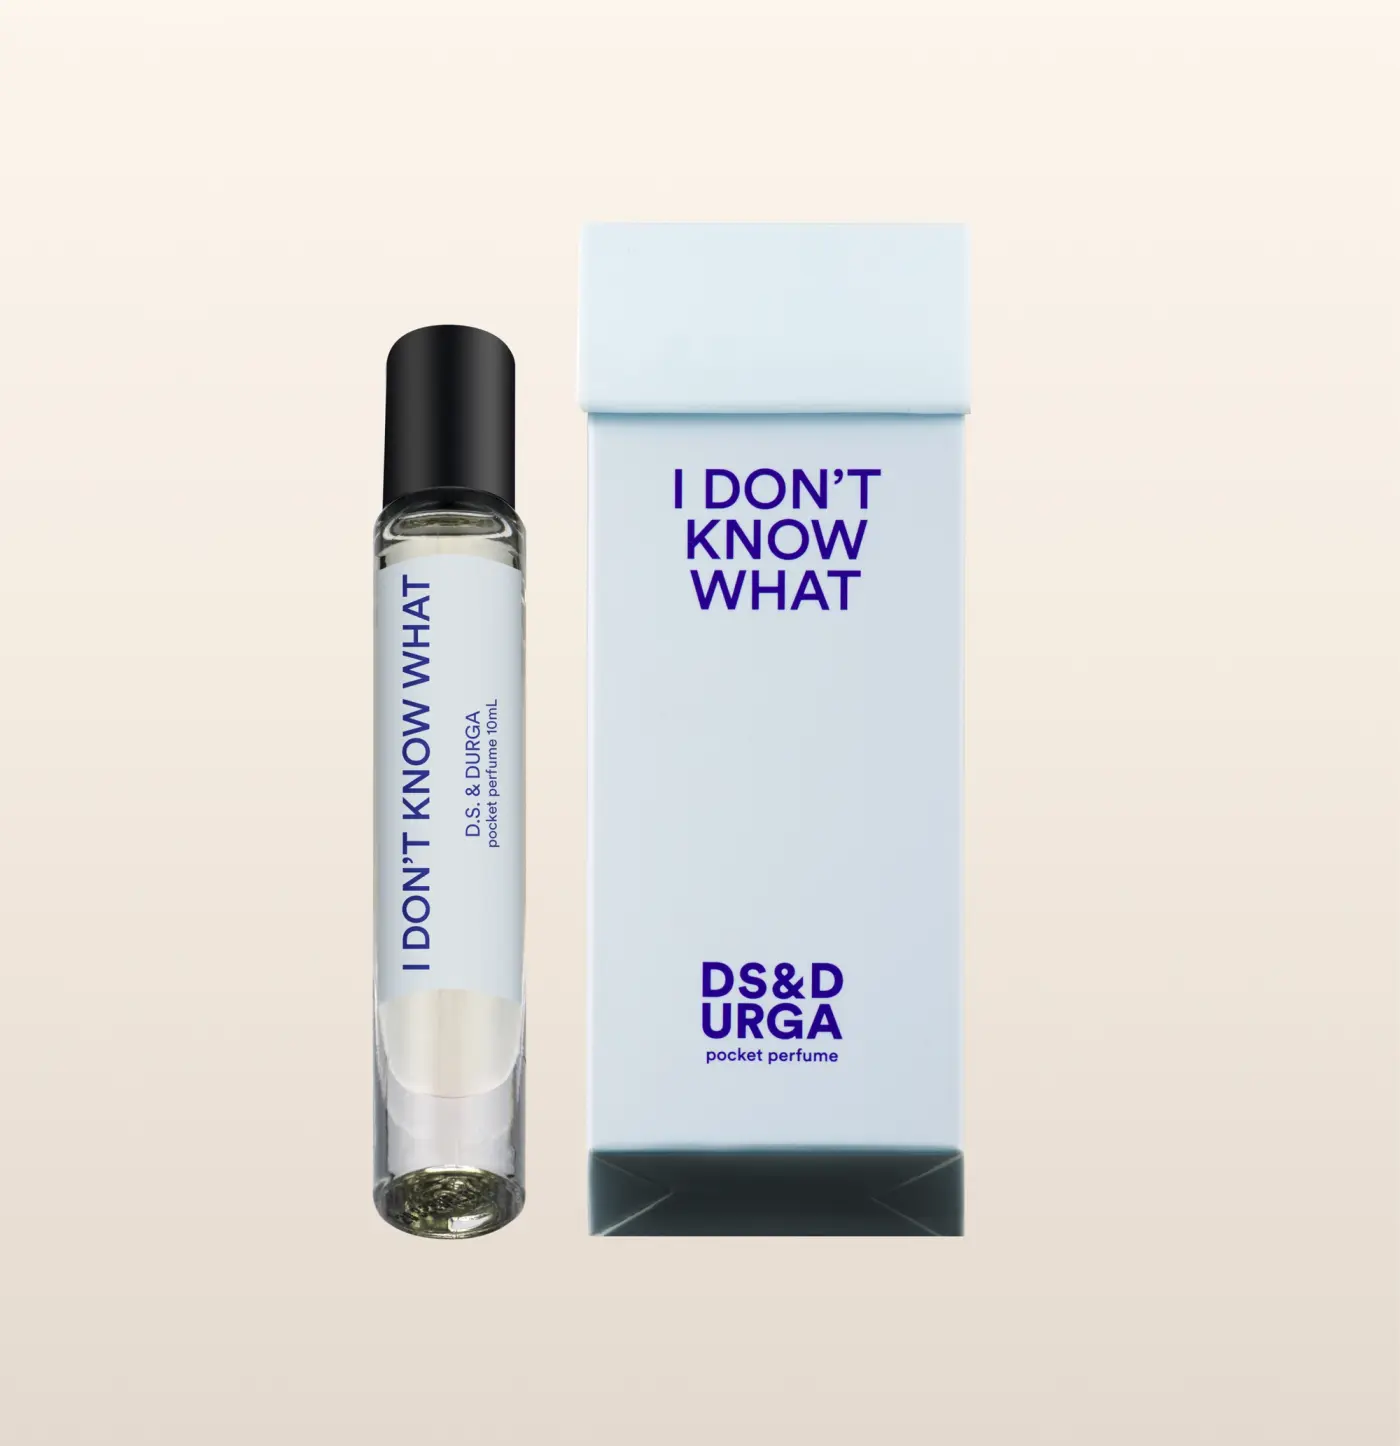 I Don't Know What Pocket Perfume by D.S. & Durga